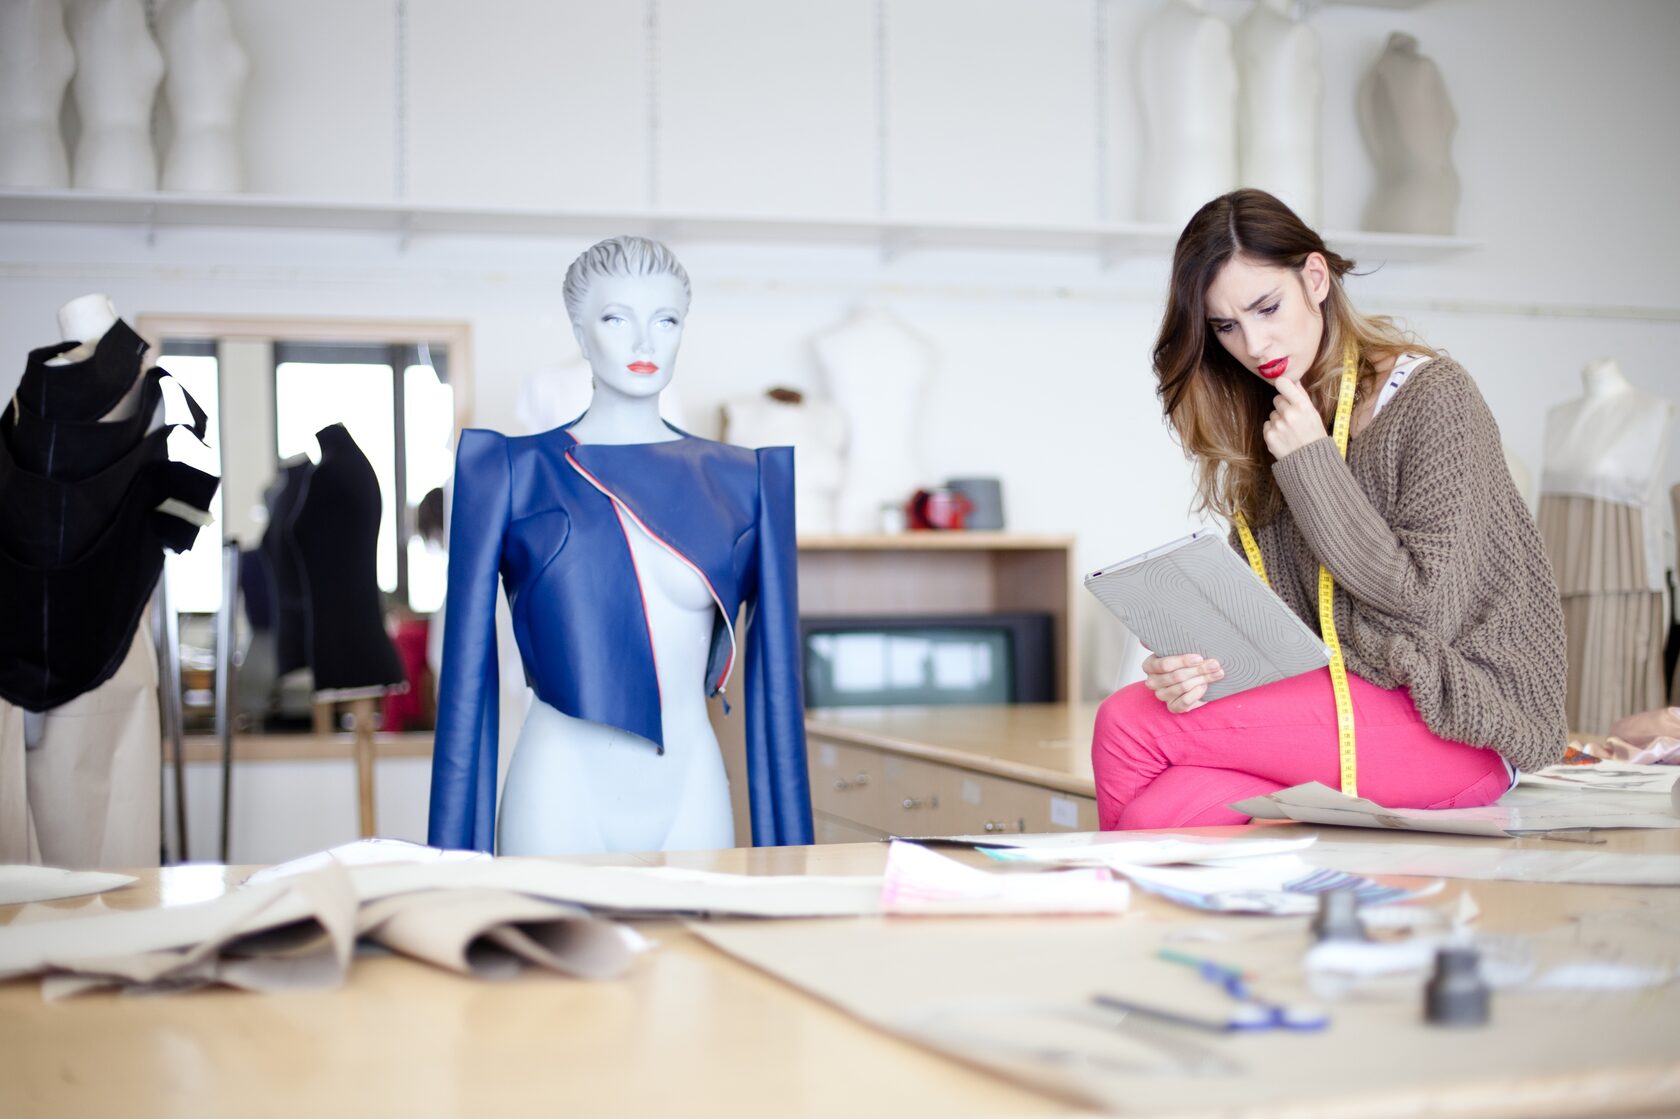 An Introduction To A Career In Fashion Design